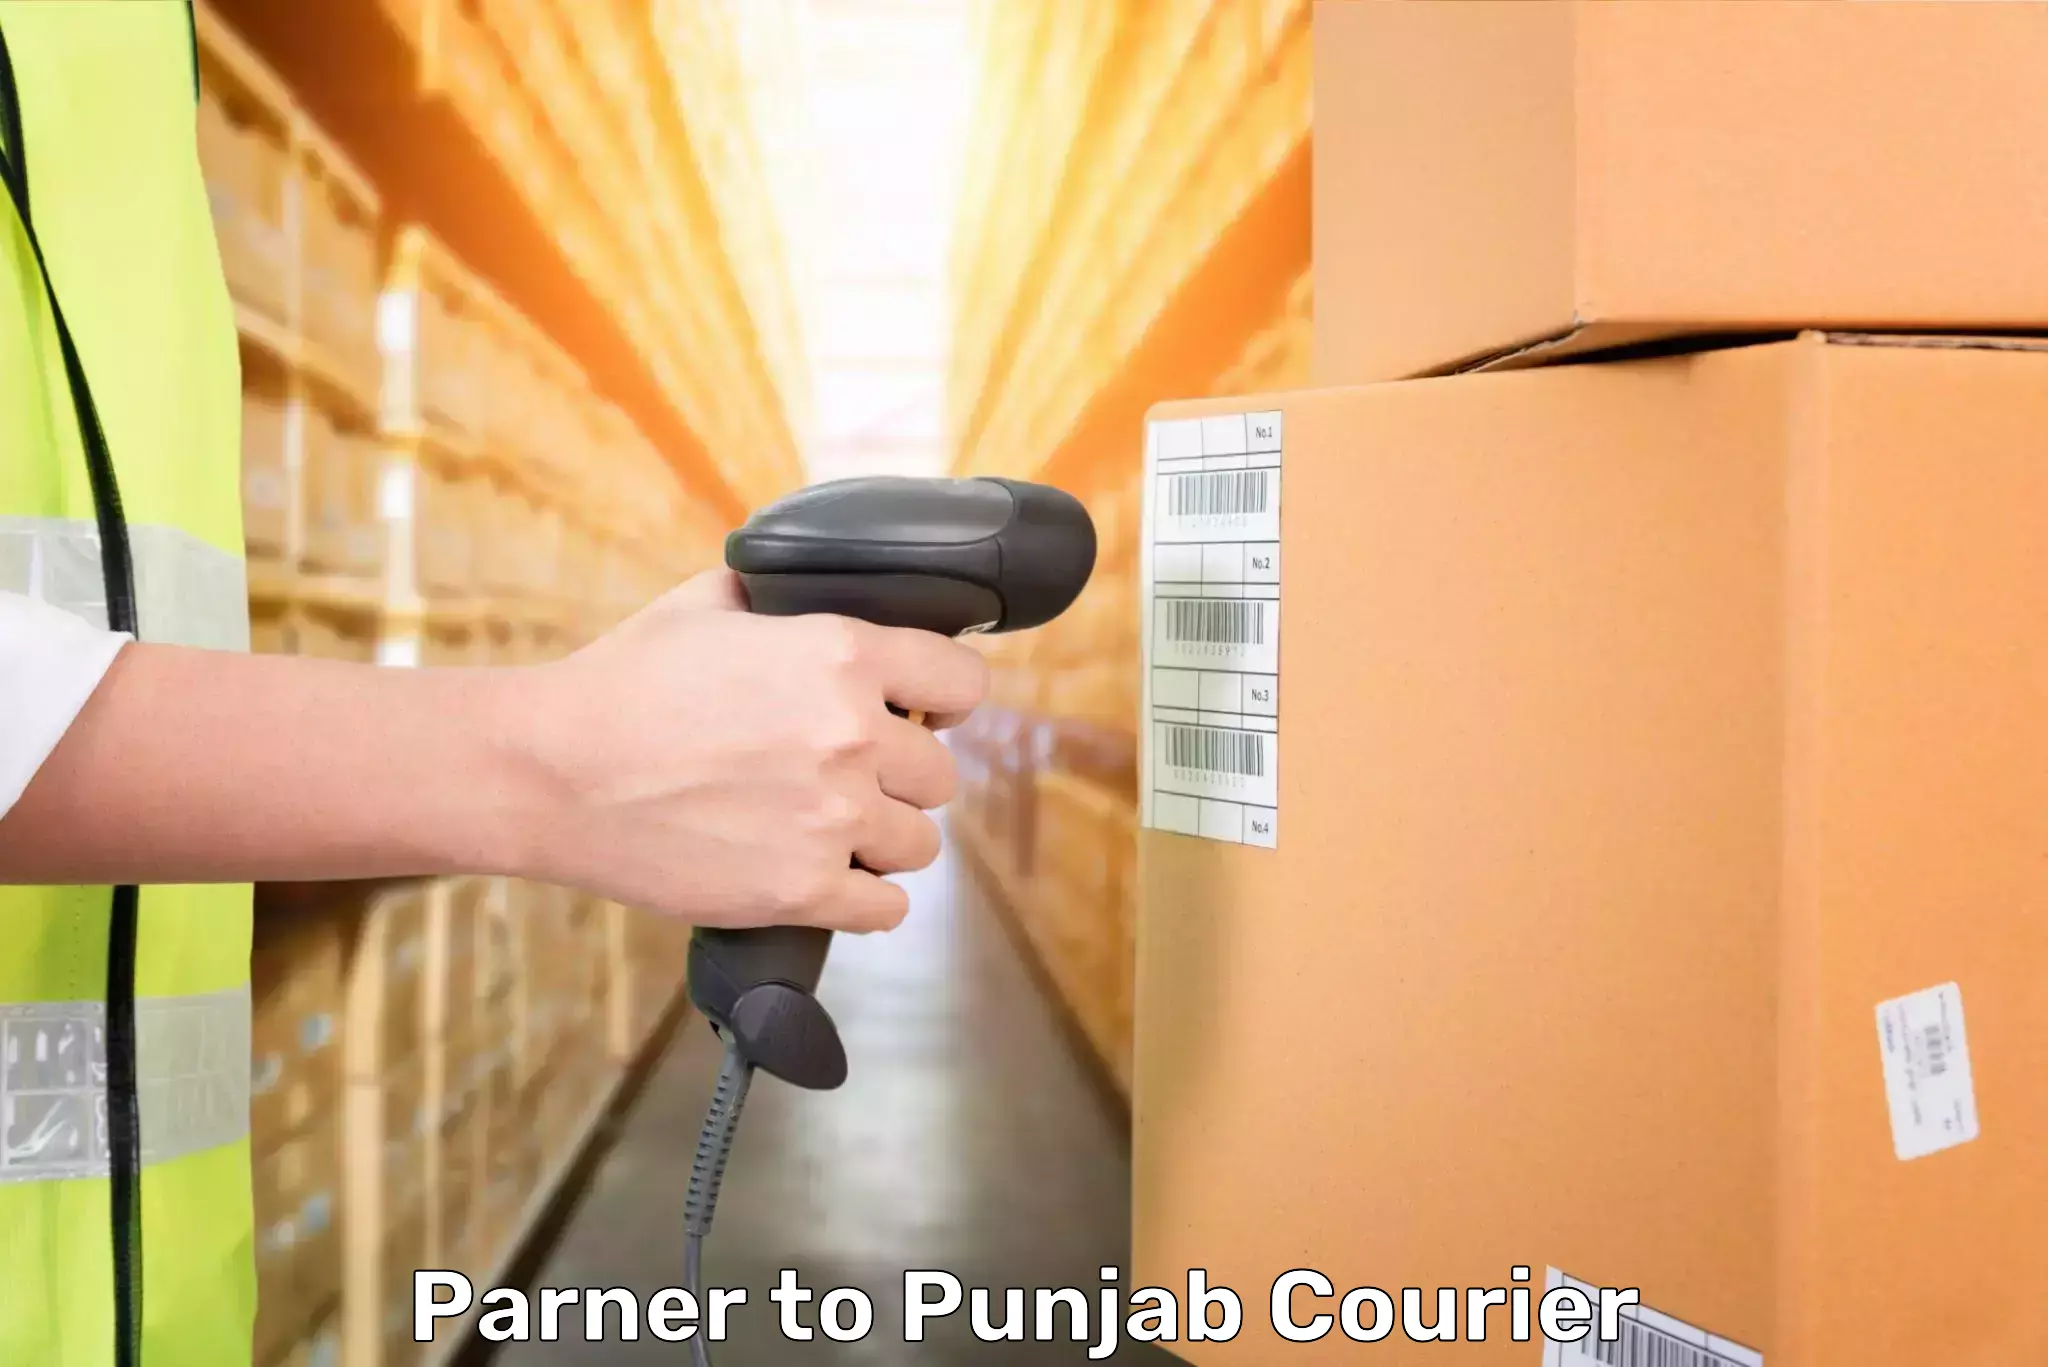 Luggage delivery providers Parner to Punjab